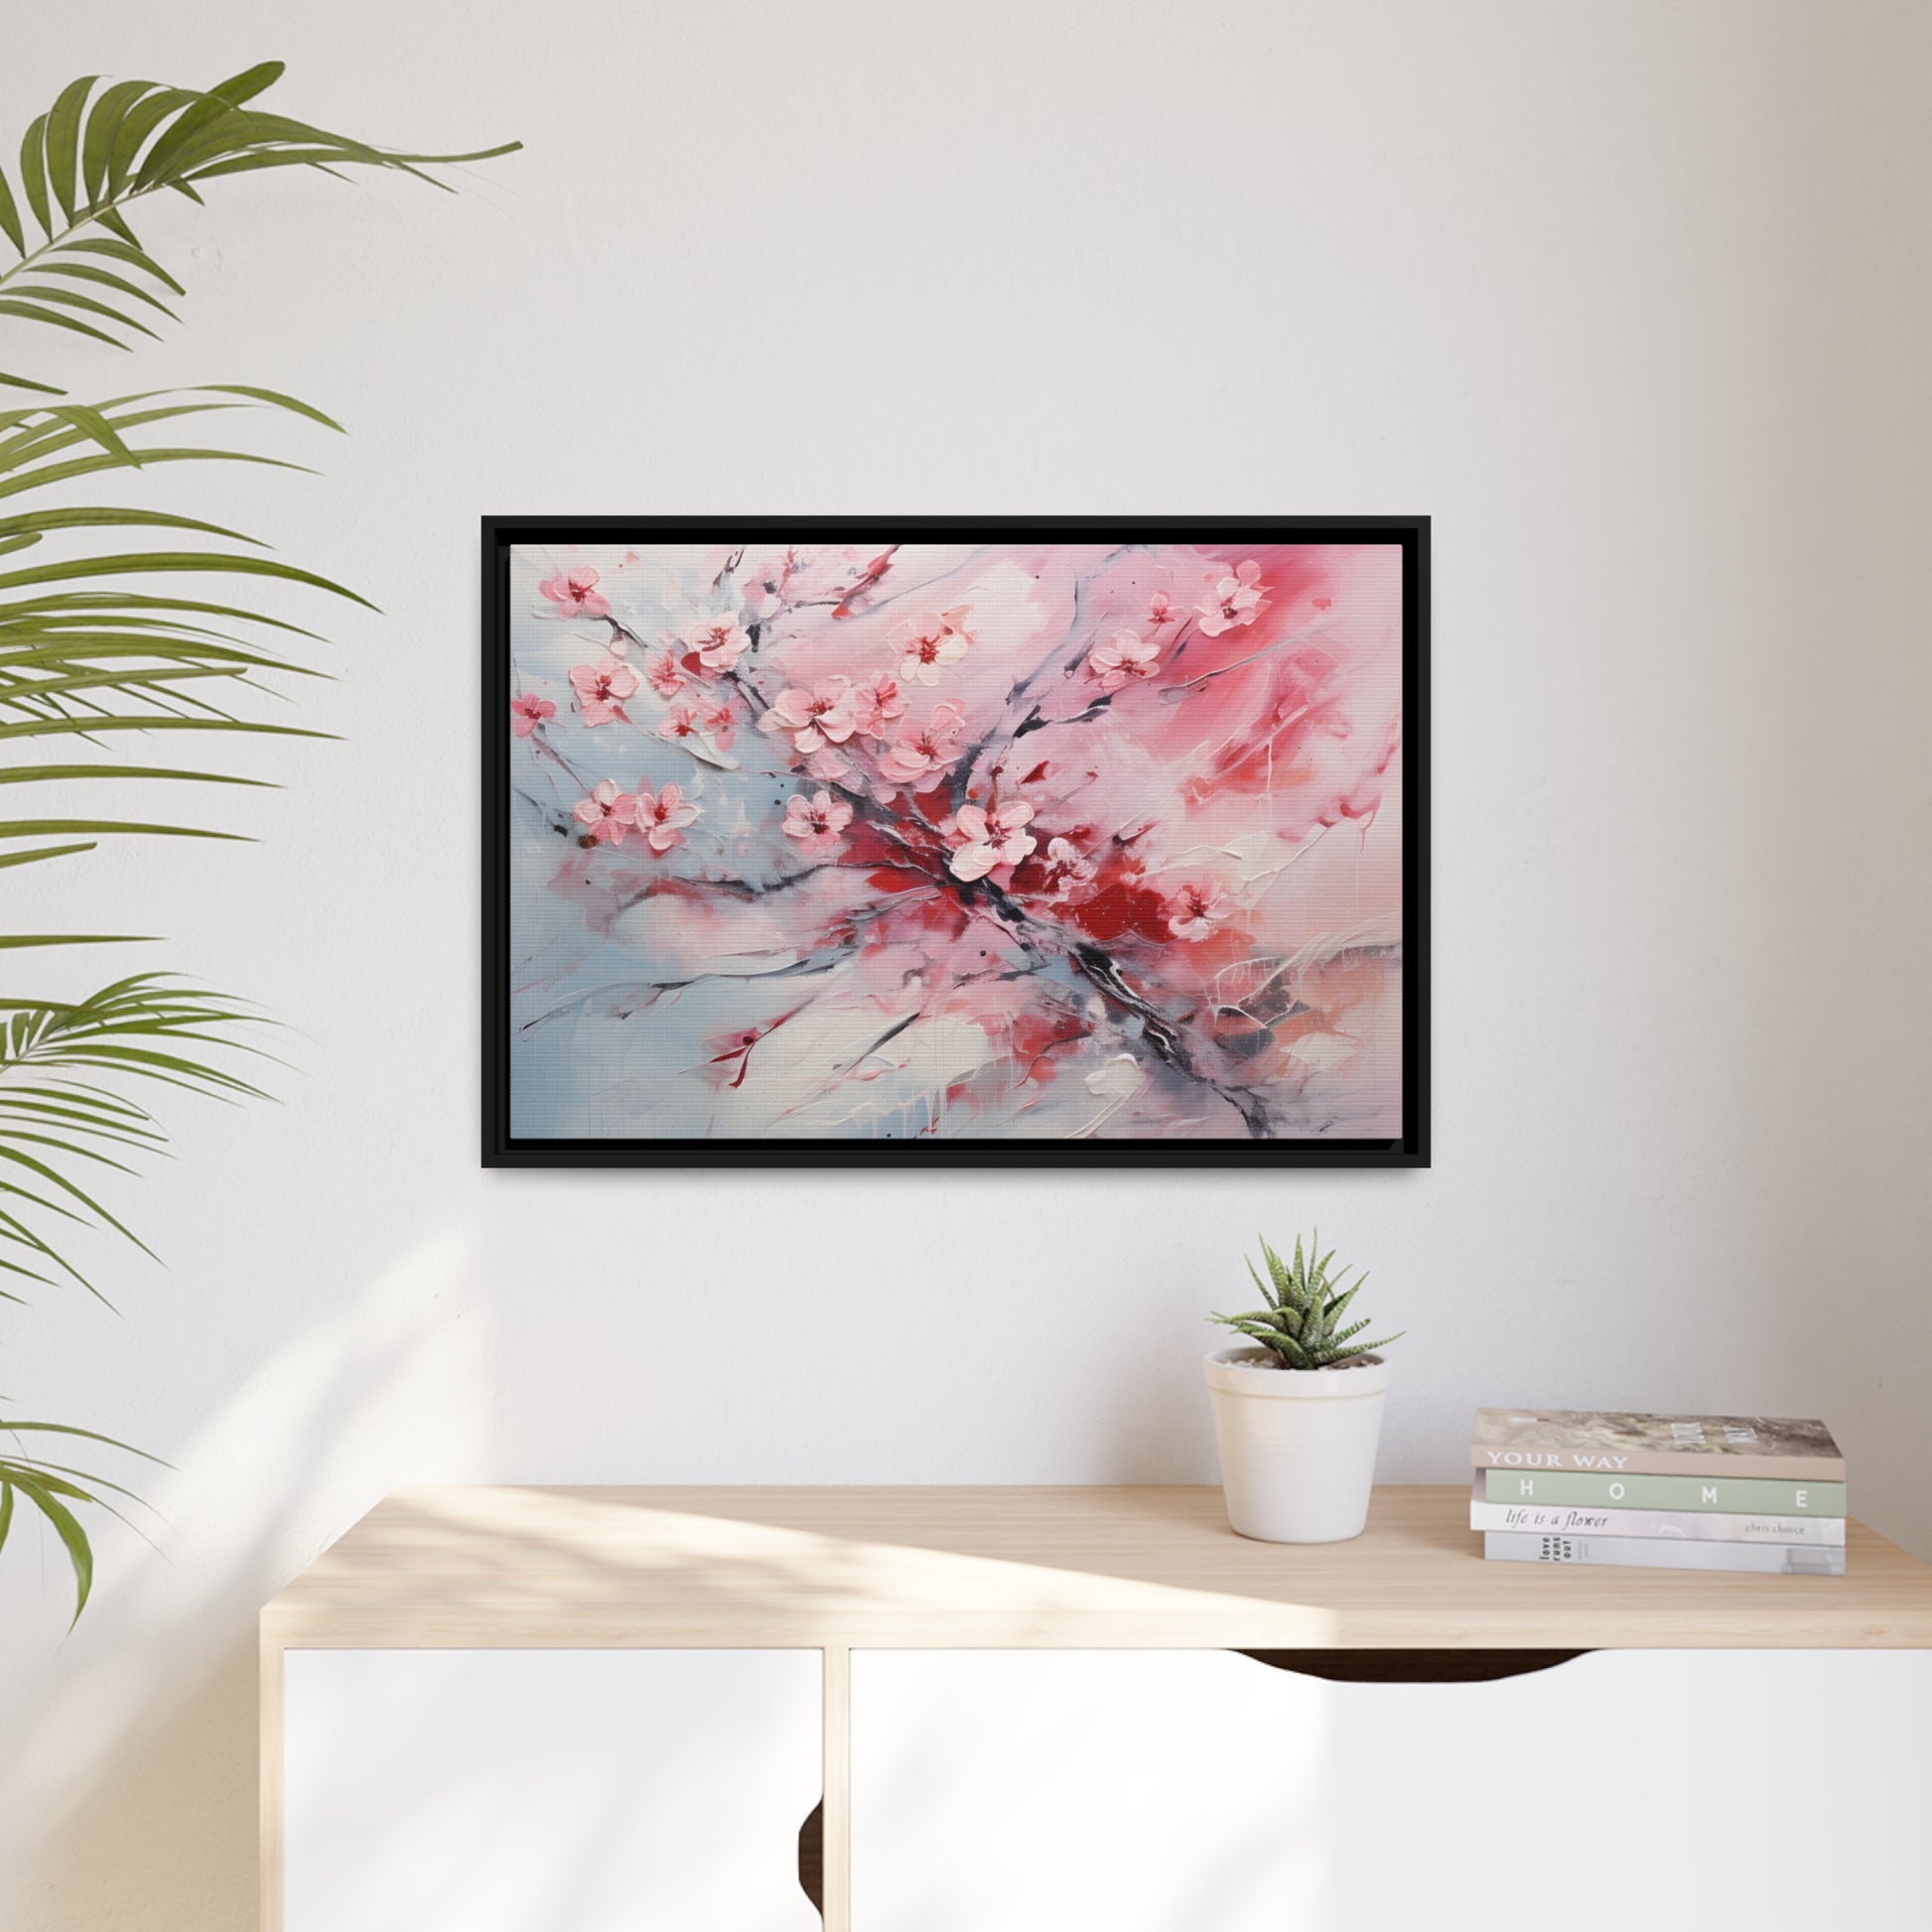 Framed Canvas Nature Inspired Artwork Stunning Gloomy Cherry Blossom Tree Oil Painting Style Framed Canvas Print